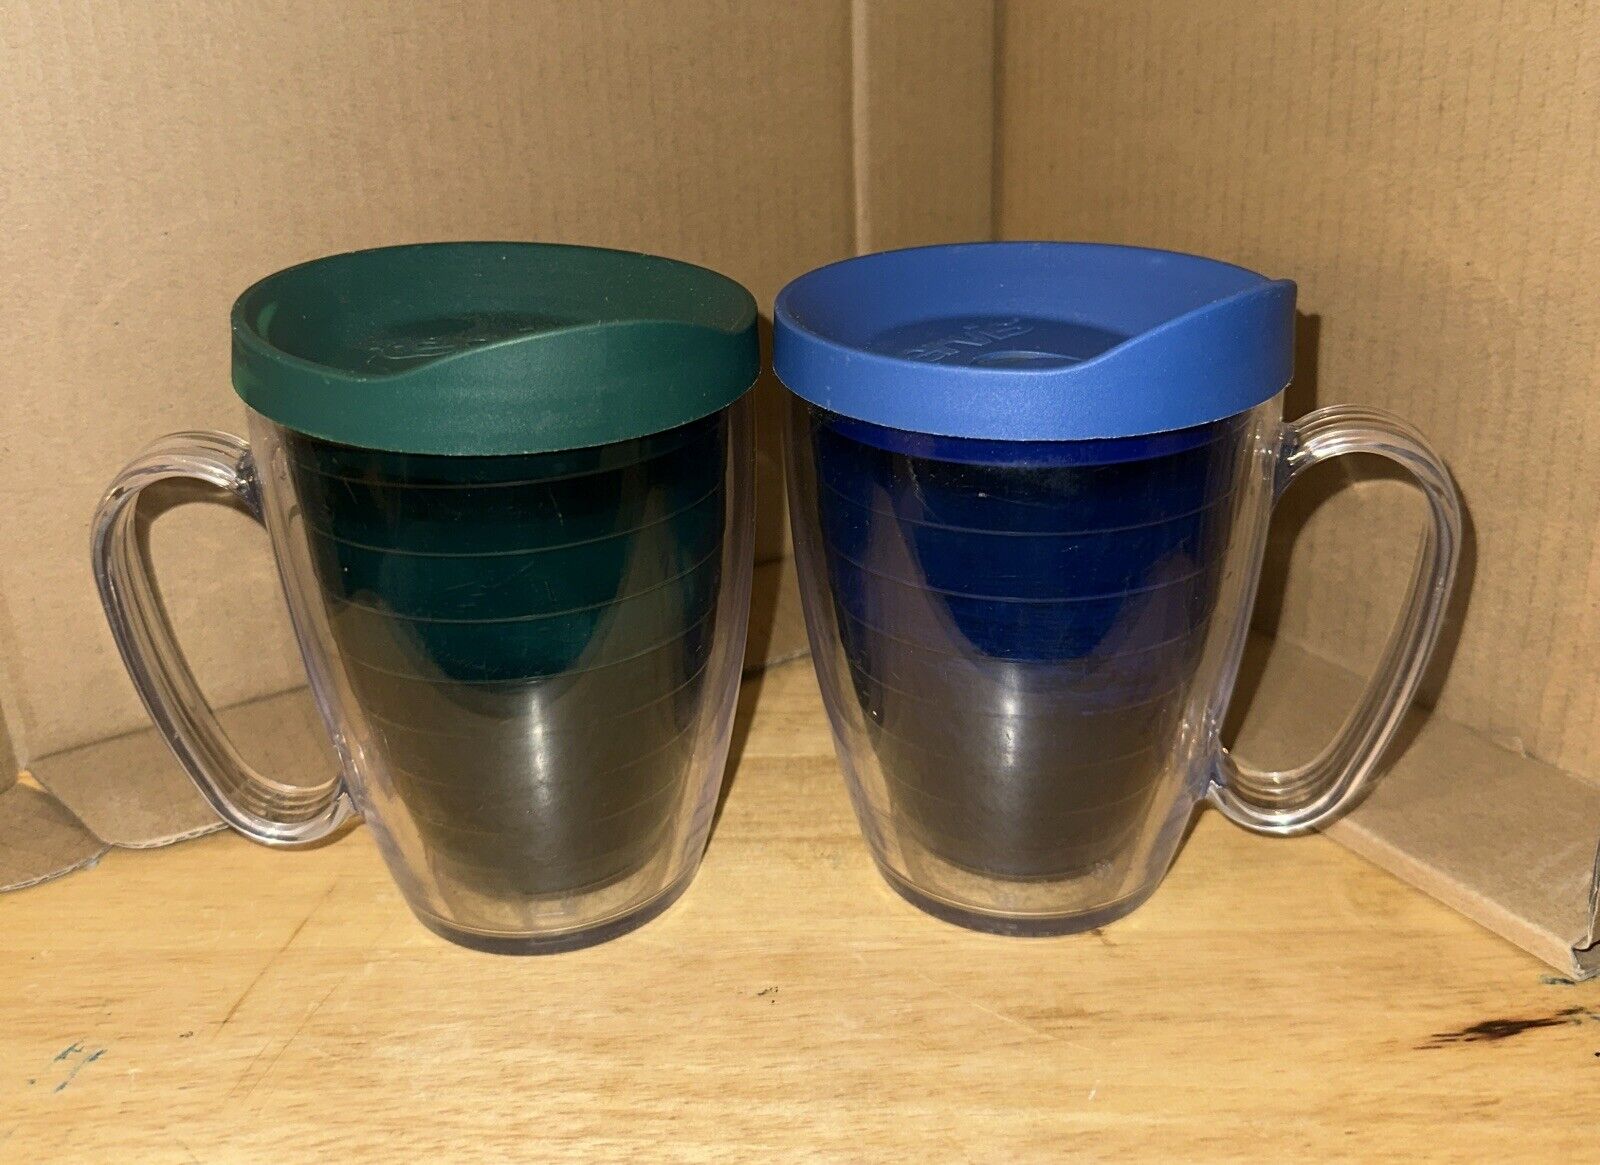 2 Tervis Mugs Green And Blue With Lids